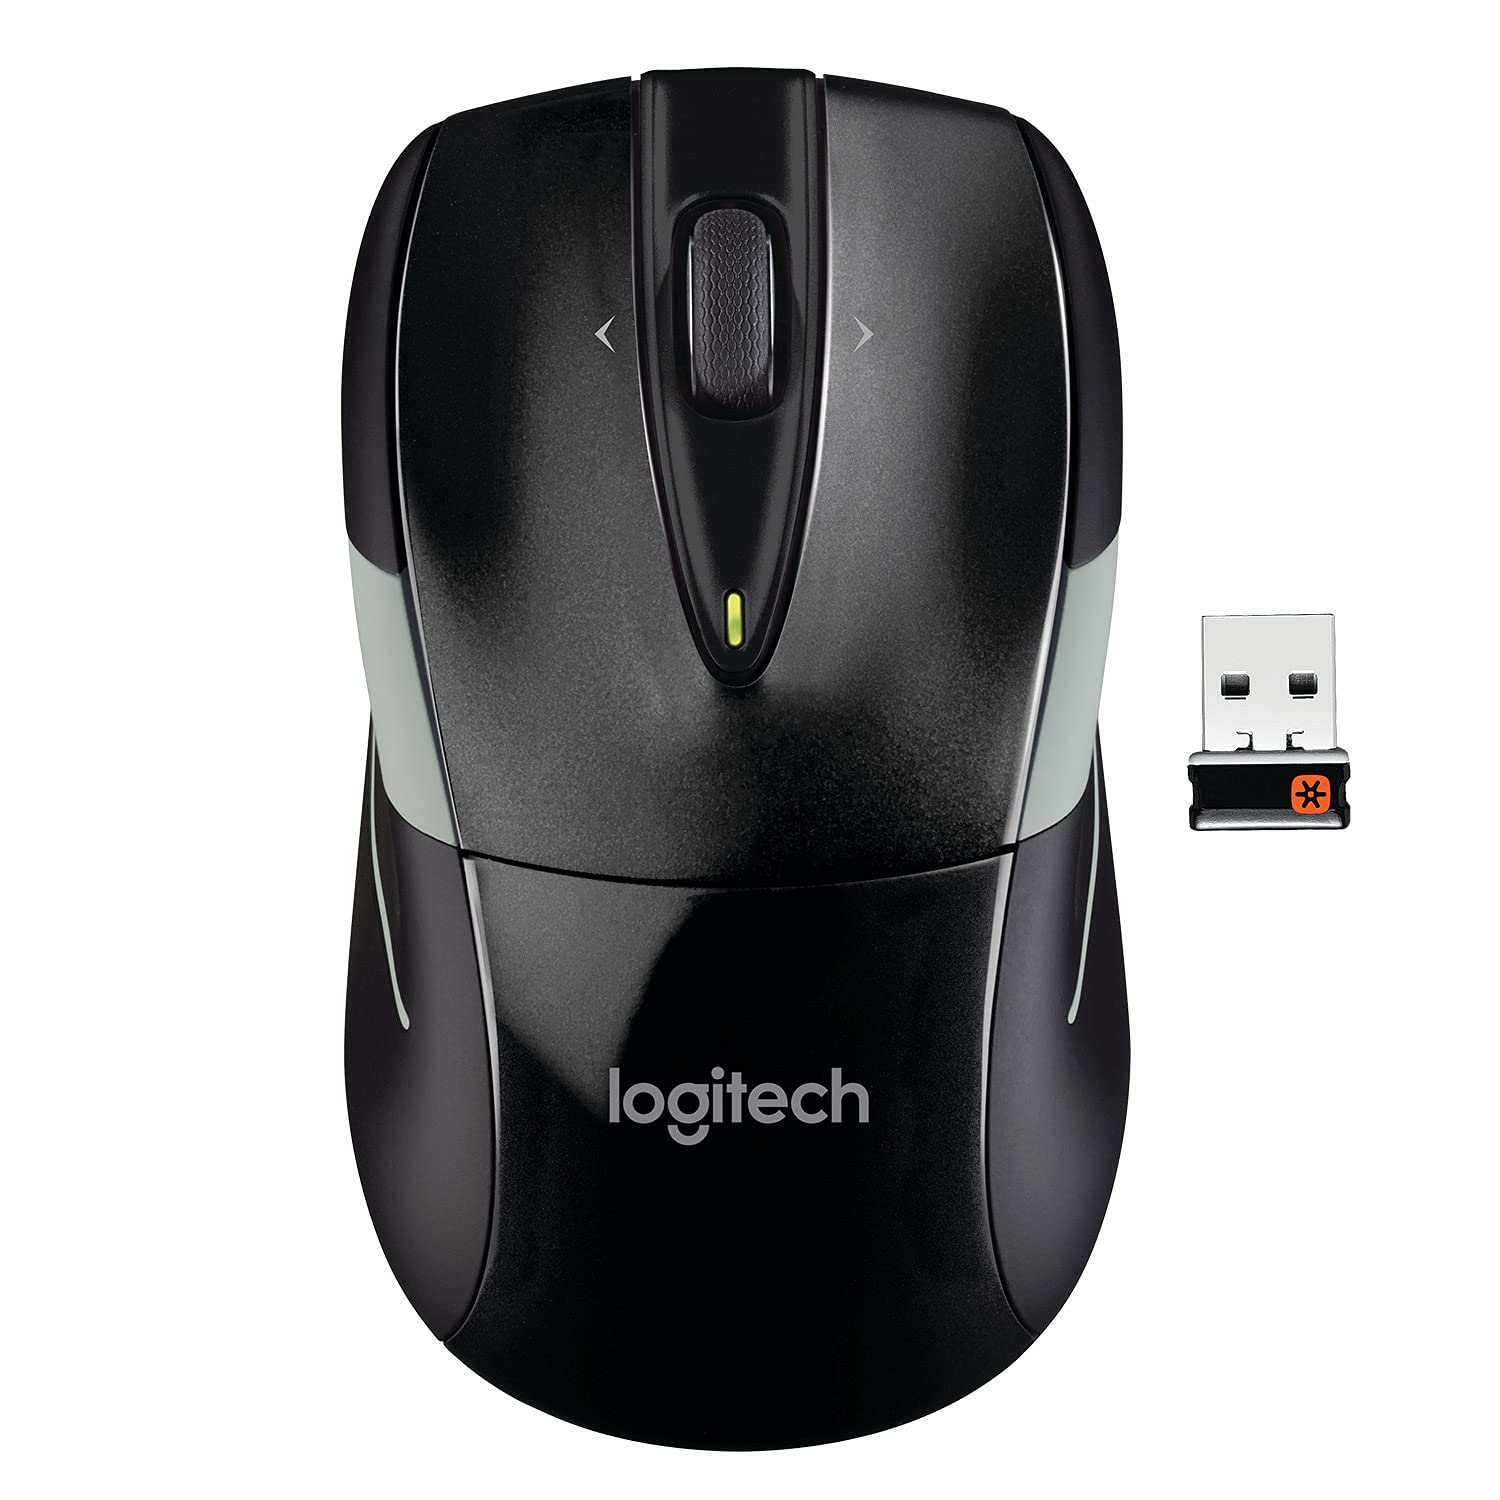 Book Cover Logitech M525 Wireless Mouse – Long 3 Year Battery Life, Ergonomic Shape for Right or Left Hand Use, Micro-Precision Scroll Wheel, and USB Unifying Receiver for Computers and Laptops, Black/Gray Mouse Black/Gray Standard Packaging